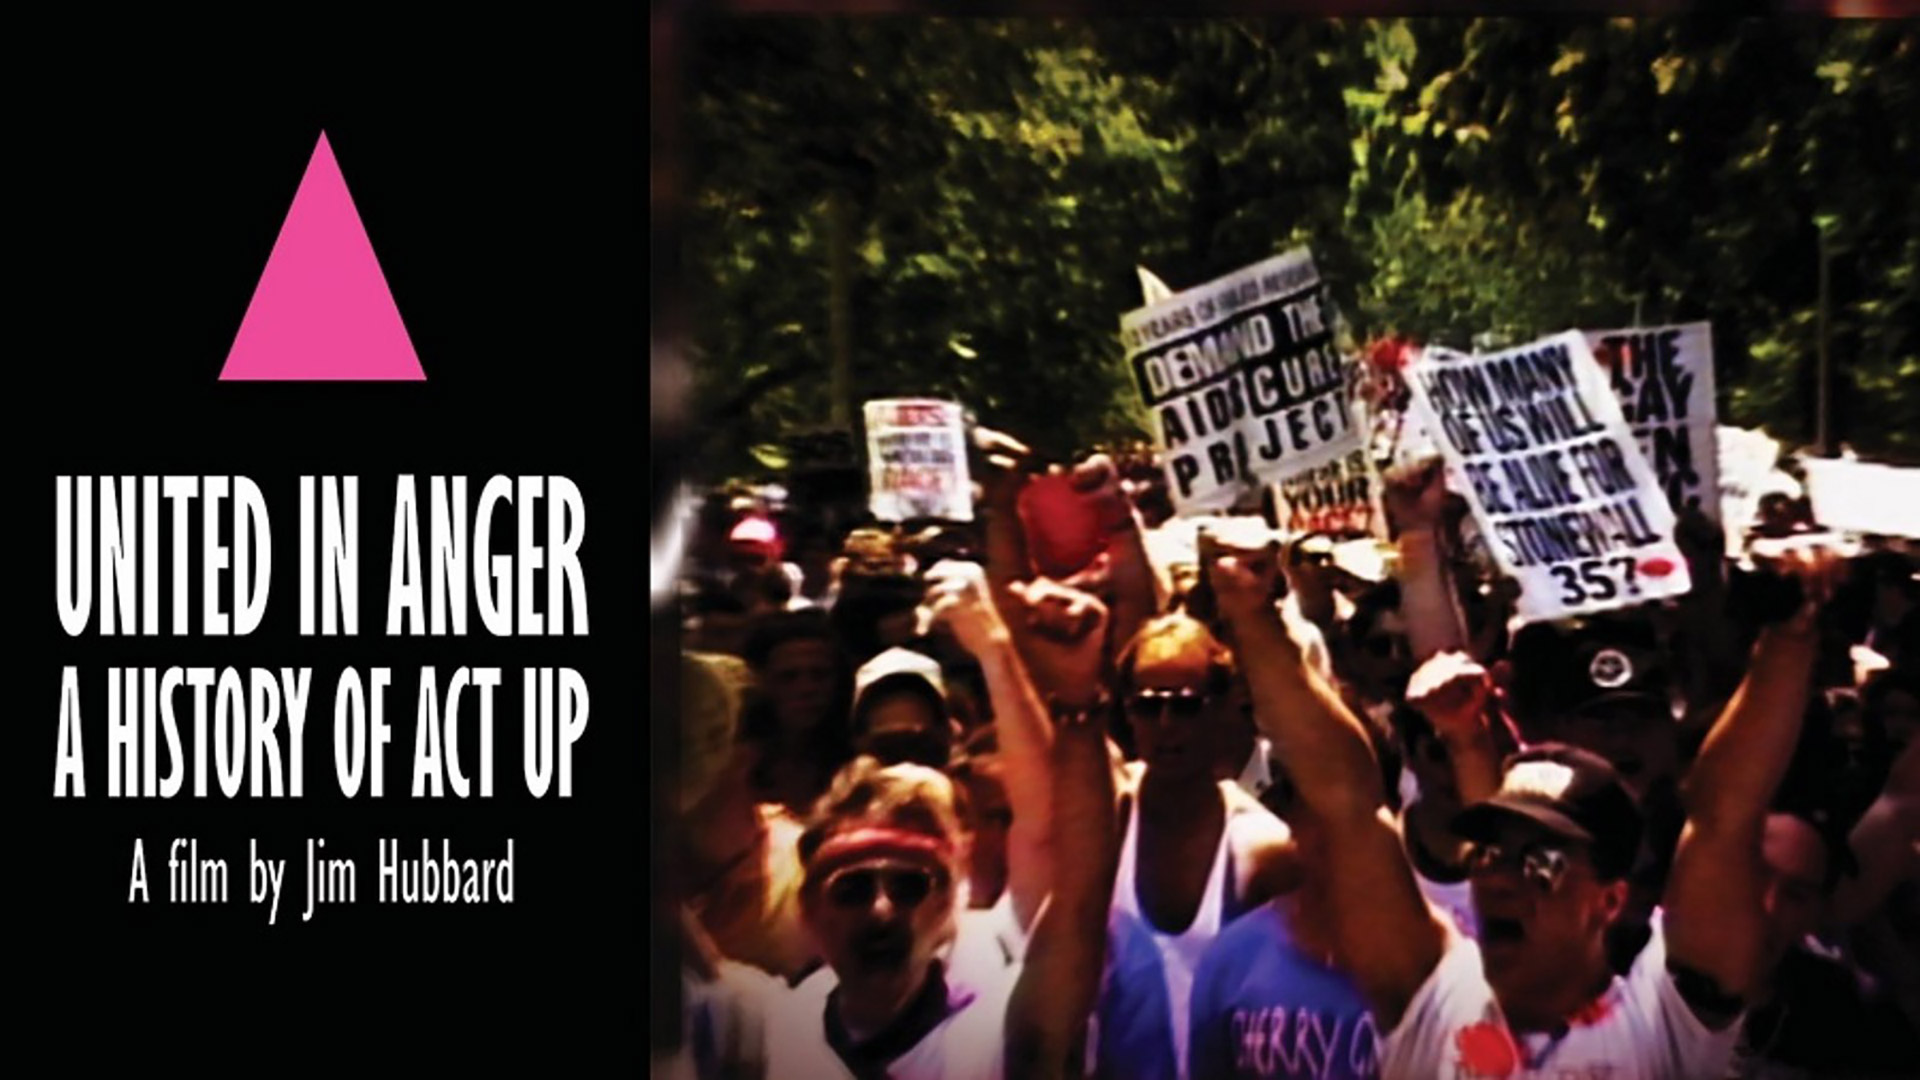 United in Anger, a film by Jim Hubbard with pink triangle and AIDS cure demonstrators with signs and arms raised